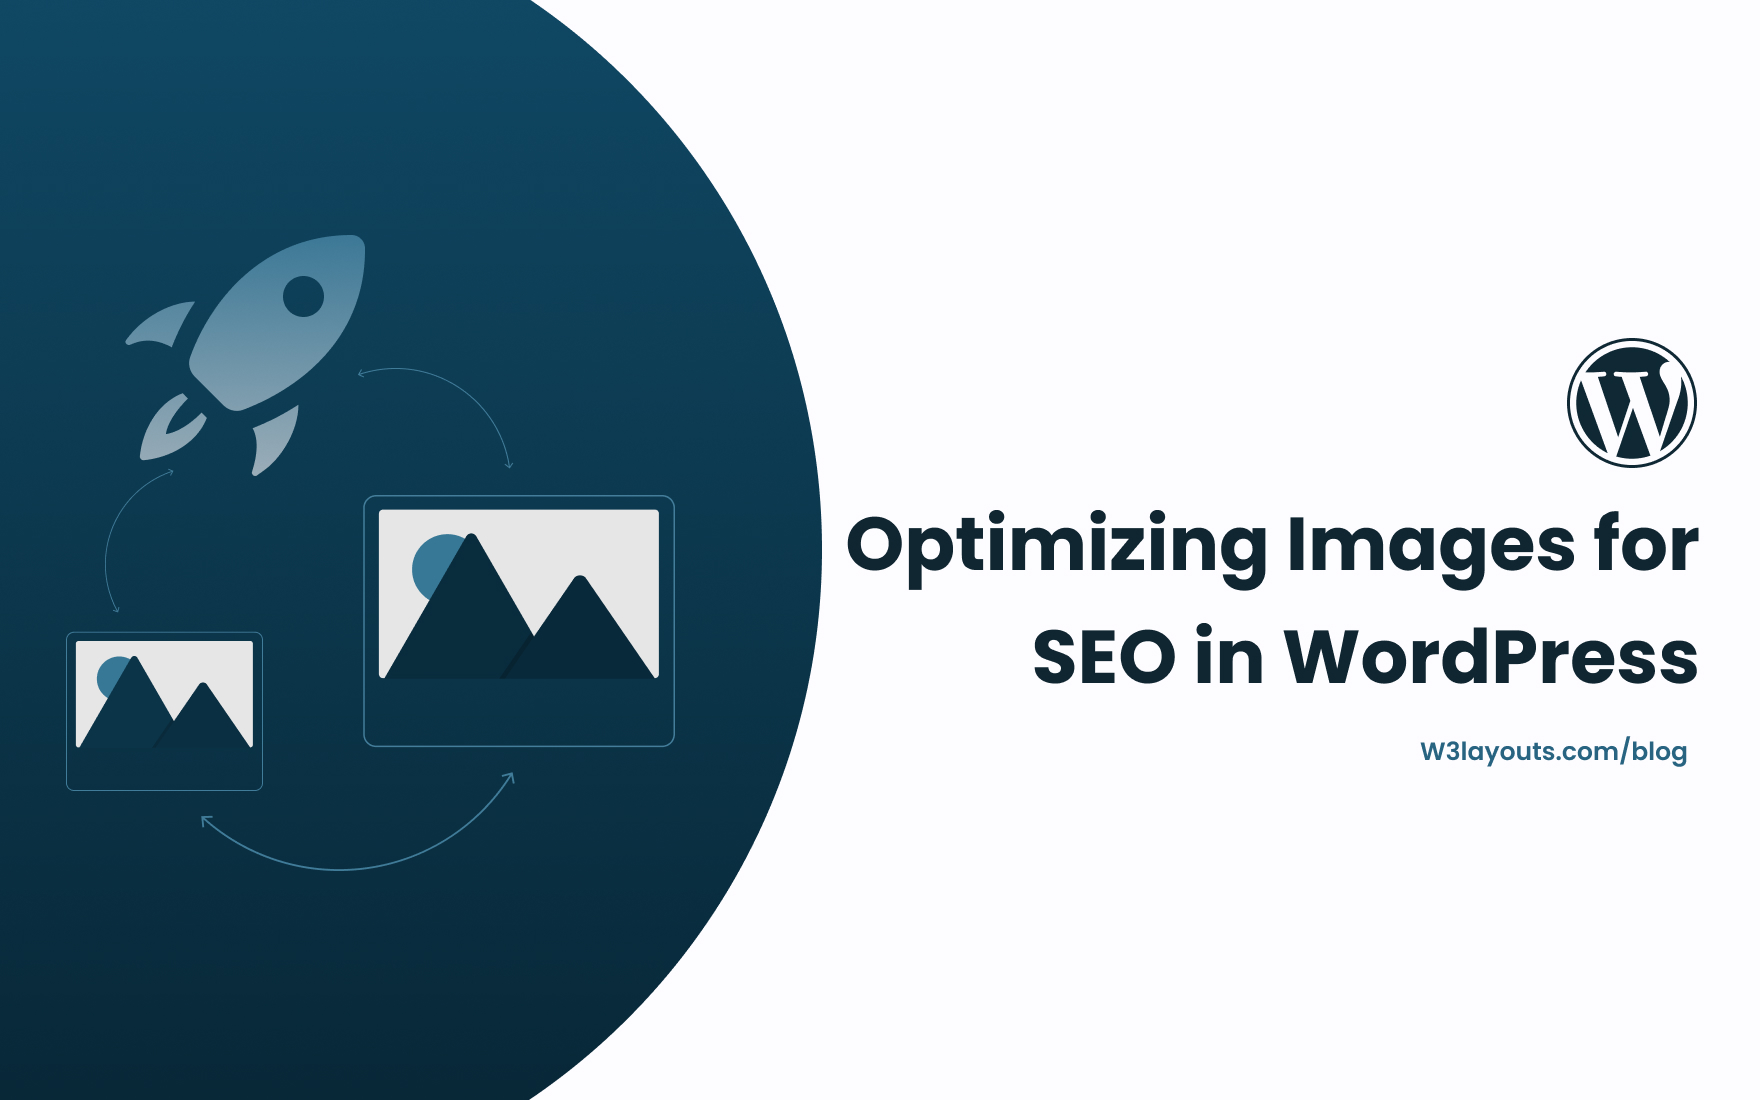 Optimizing Images for SEO in WordPress